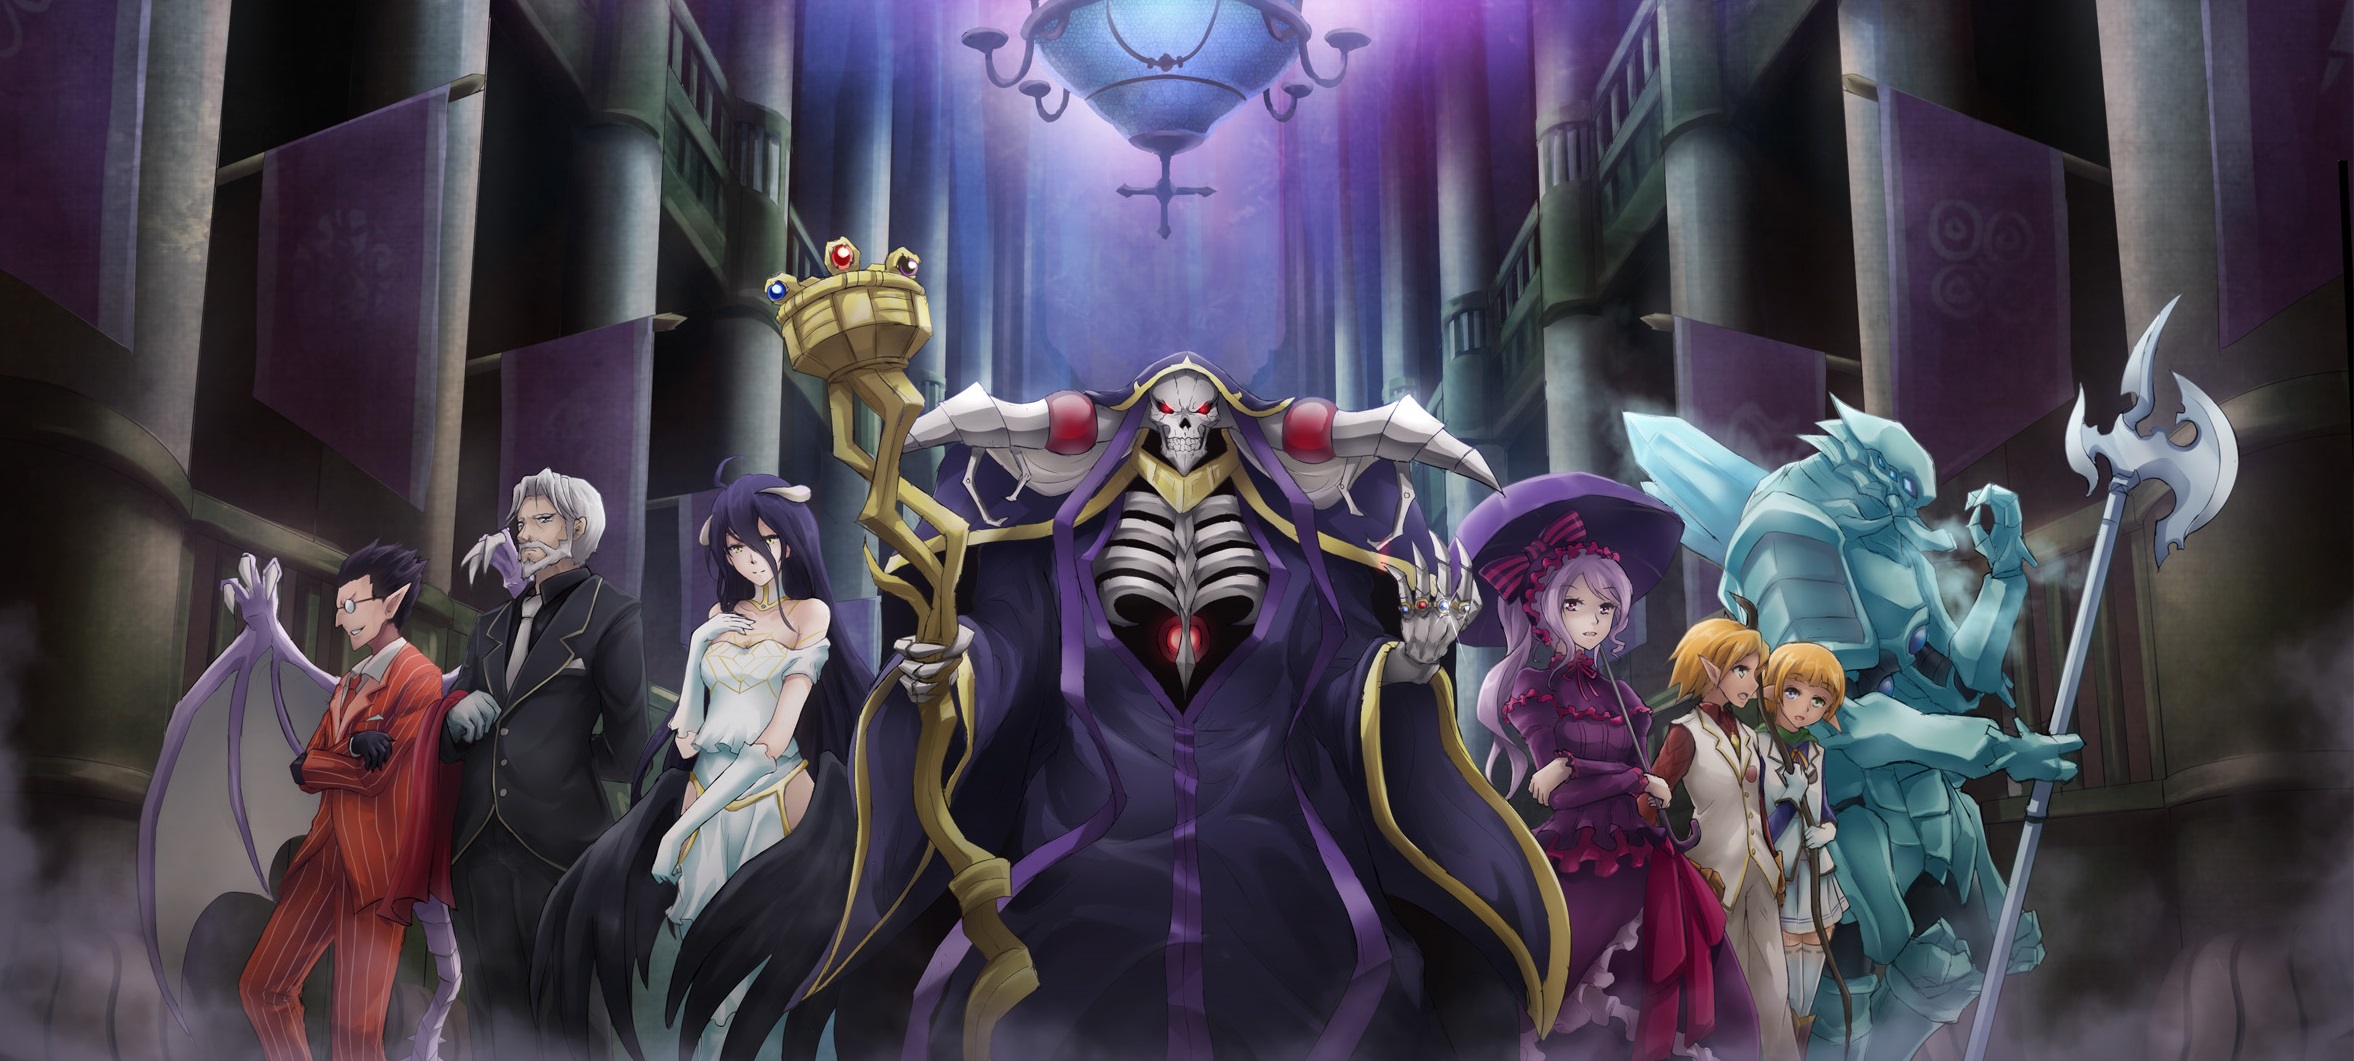 demiurge (overlord), cocytus (overlord), overlord, anime, ainz ooal gown, albedo (overlord), aura bella fiora, great tomb of nazarick, mare bello fiore, sebas tian, shalltear bloodfallen